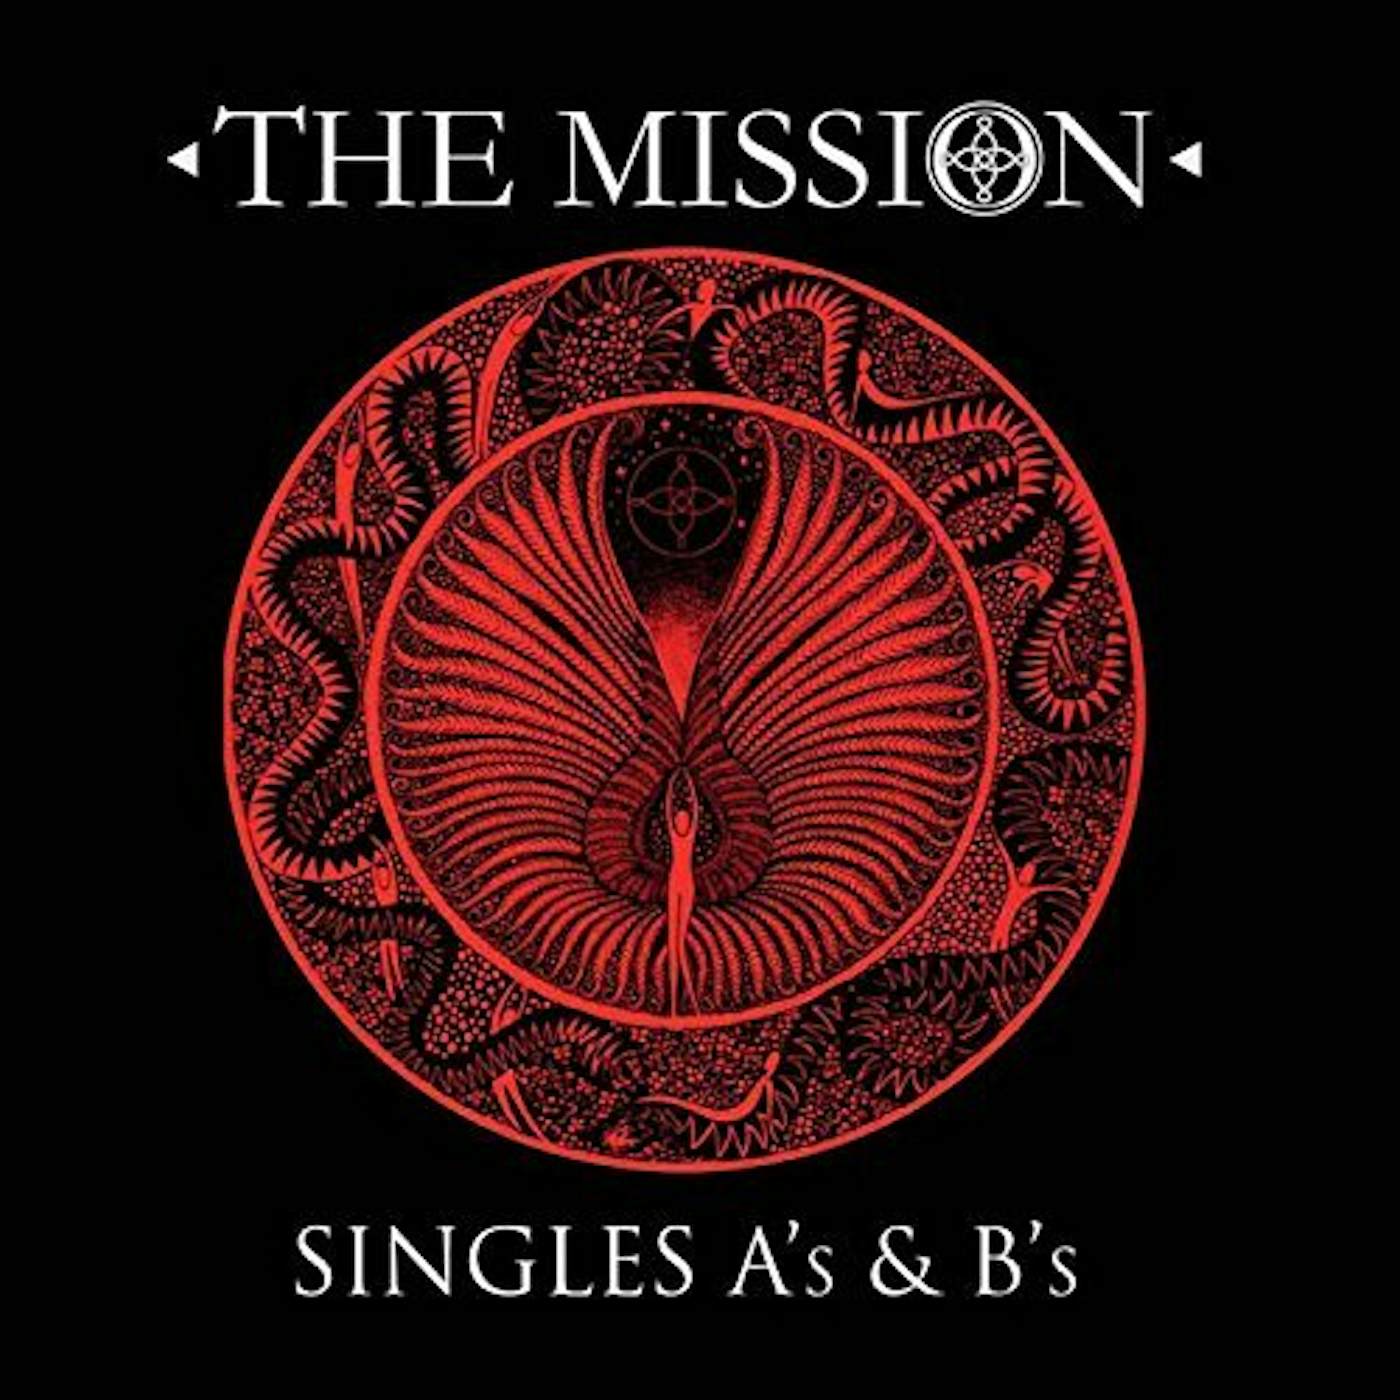 The Mission SINGLES CD